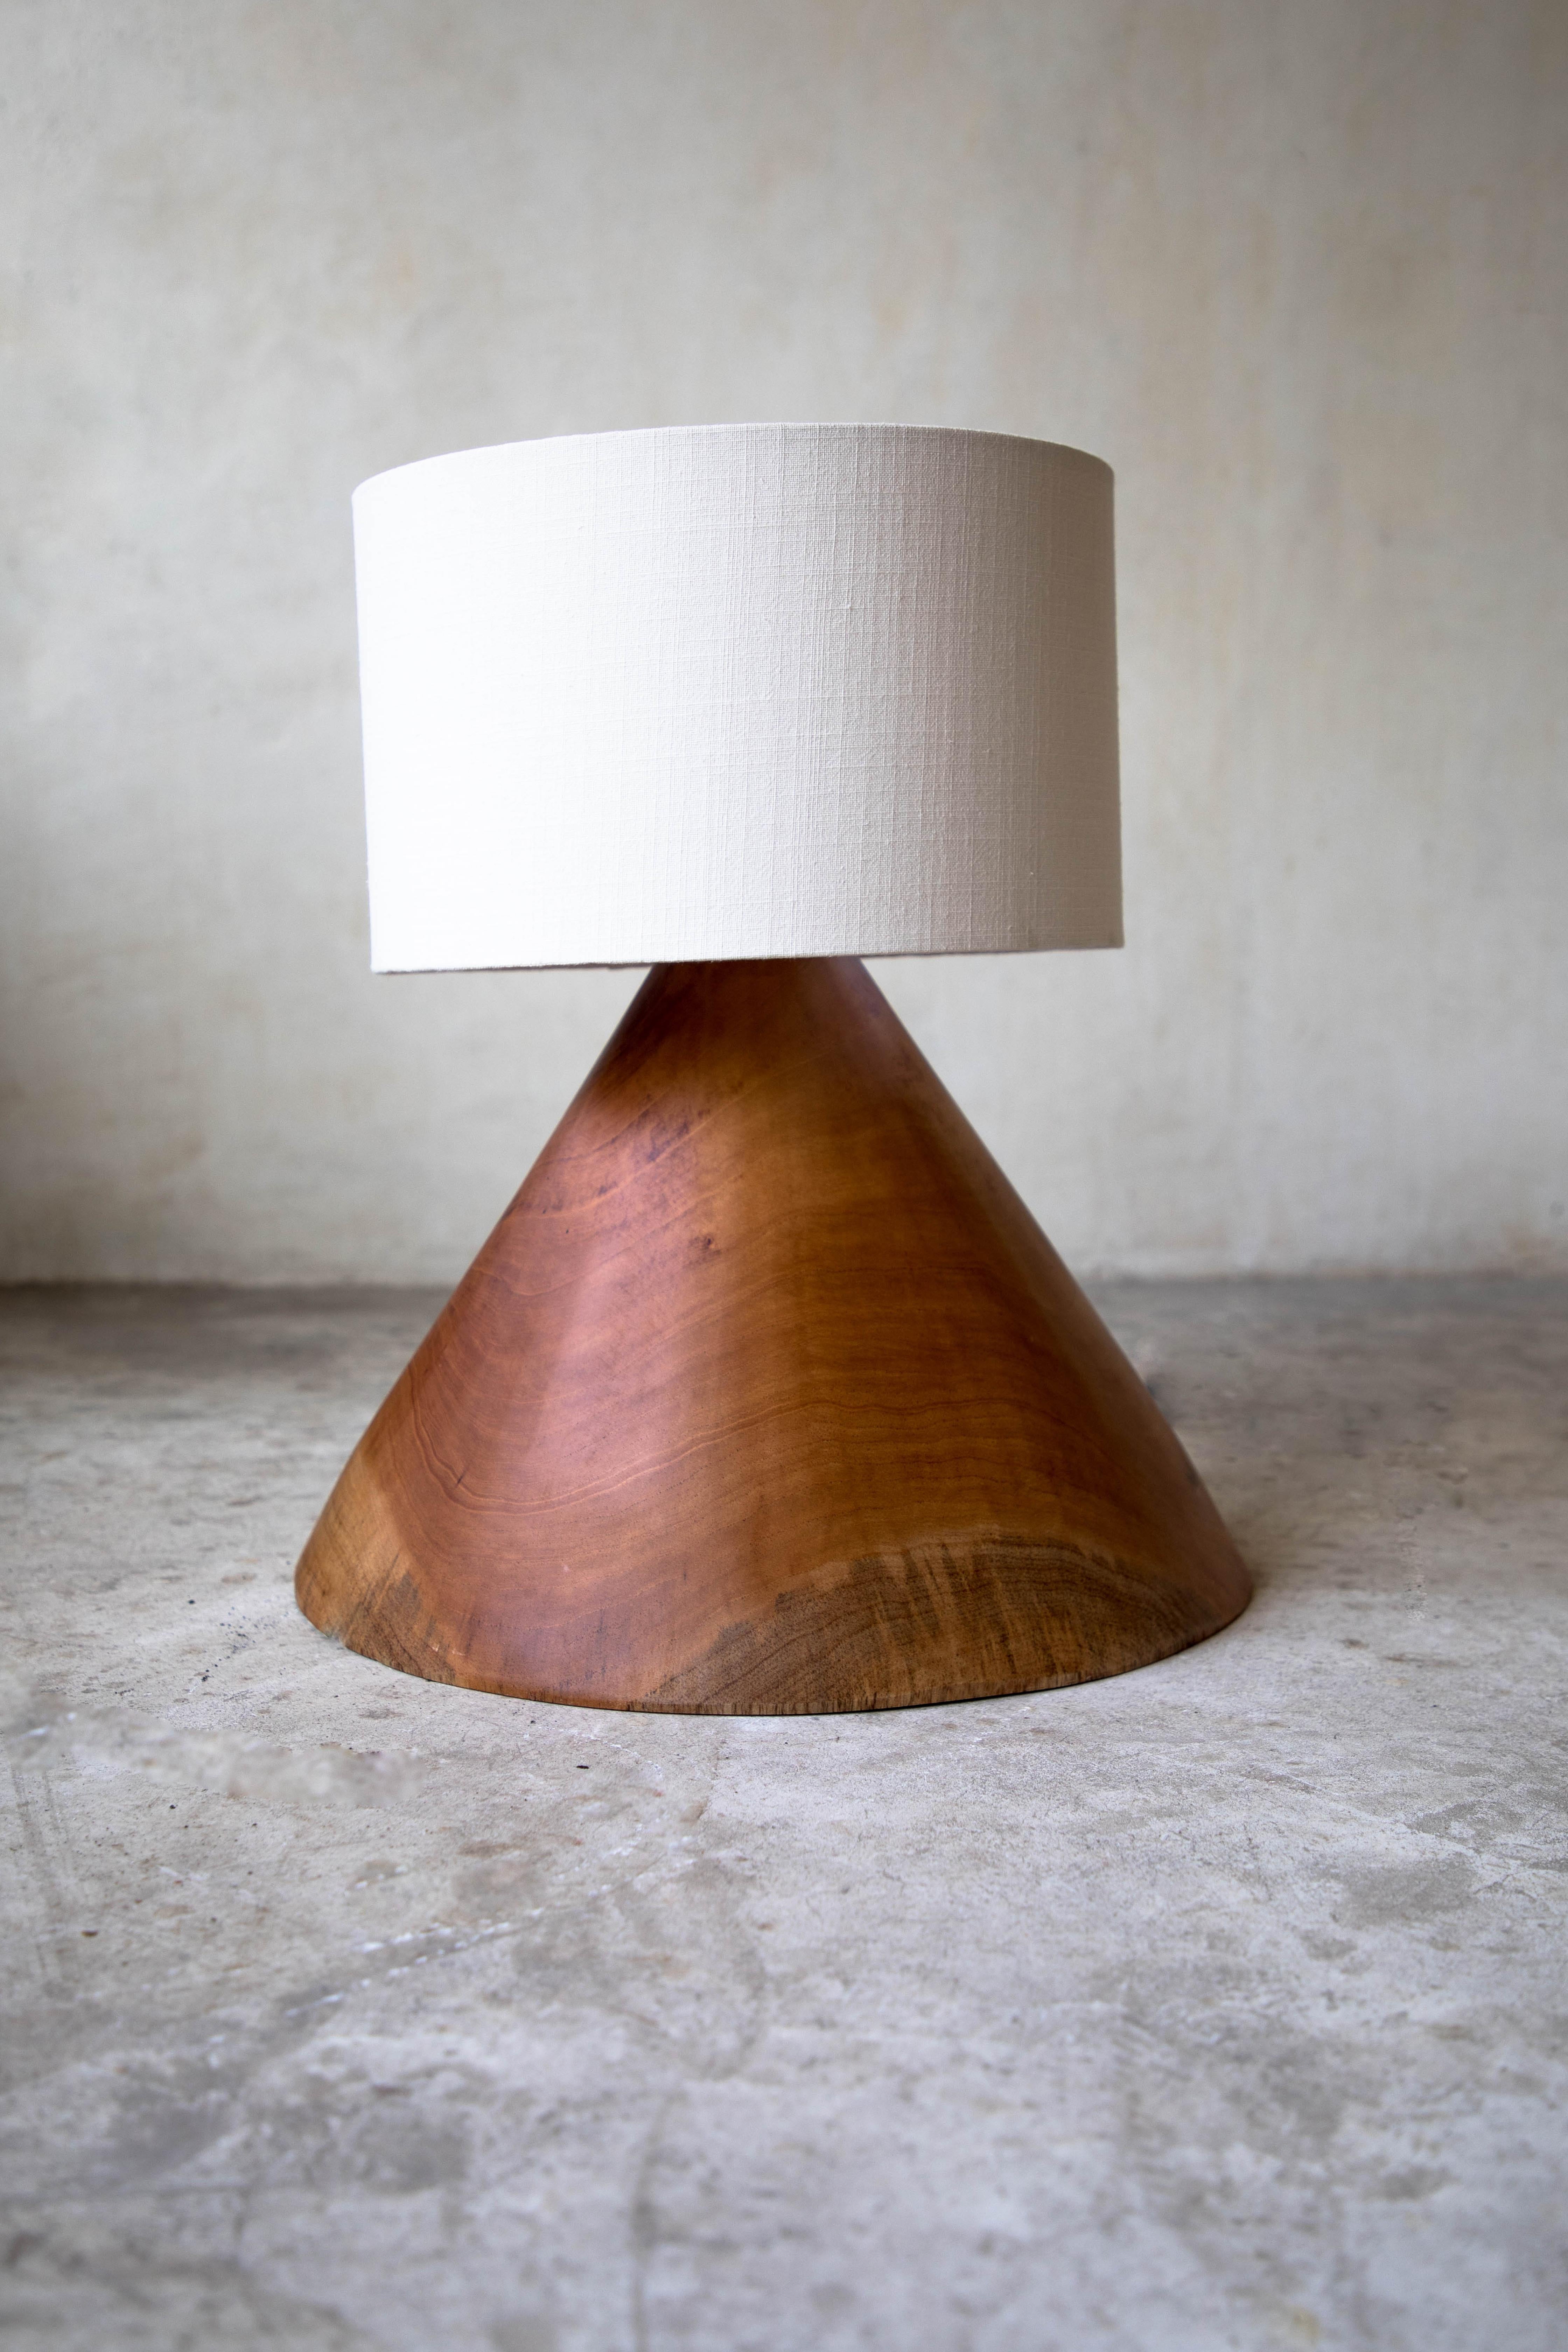 Original 08 cone table lamp with linen screen by Daniel Orozco.
Material: jabin wood, linen.
Dimensions: D 39 x H 30 cm.
Available with palm or linen lampshade.

Jabin wood cone table lamp, with palm or linen screen. Handmade by Mexican